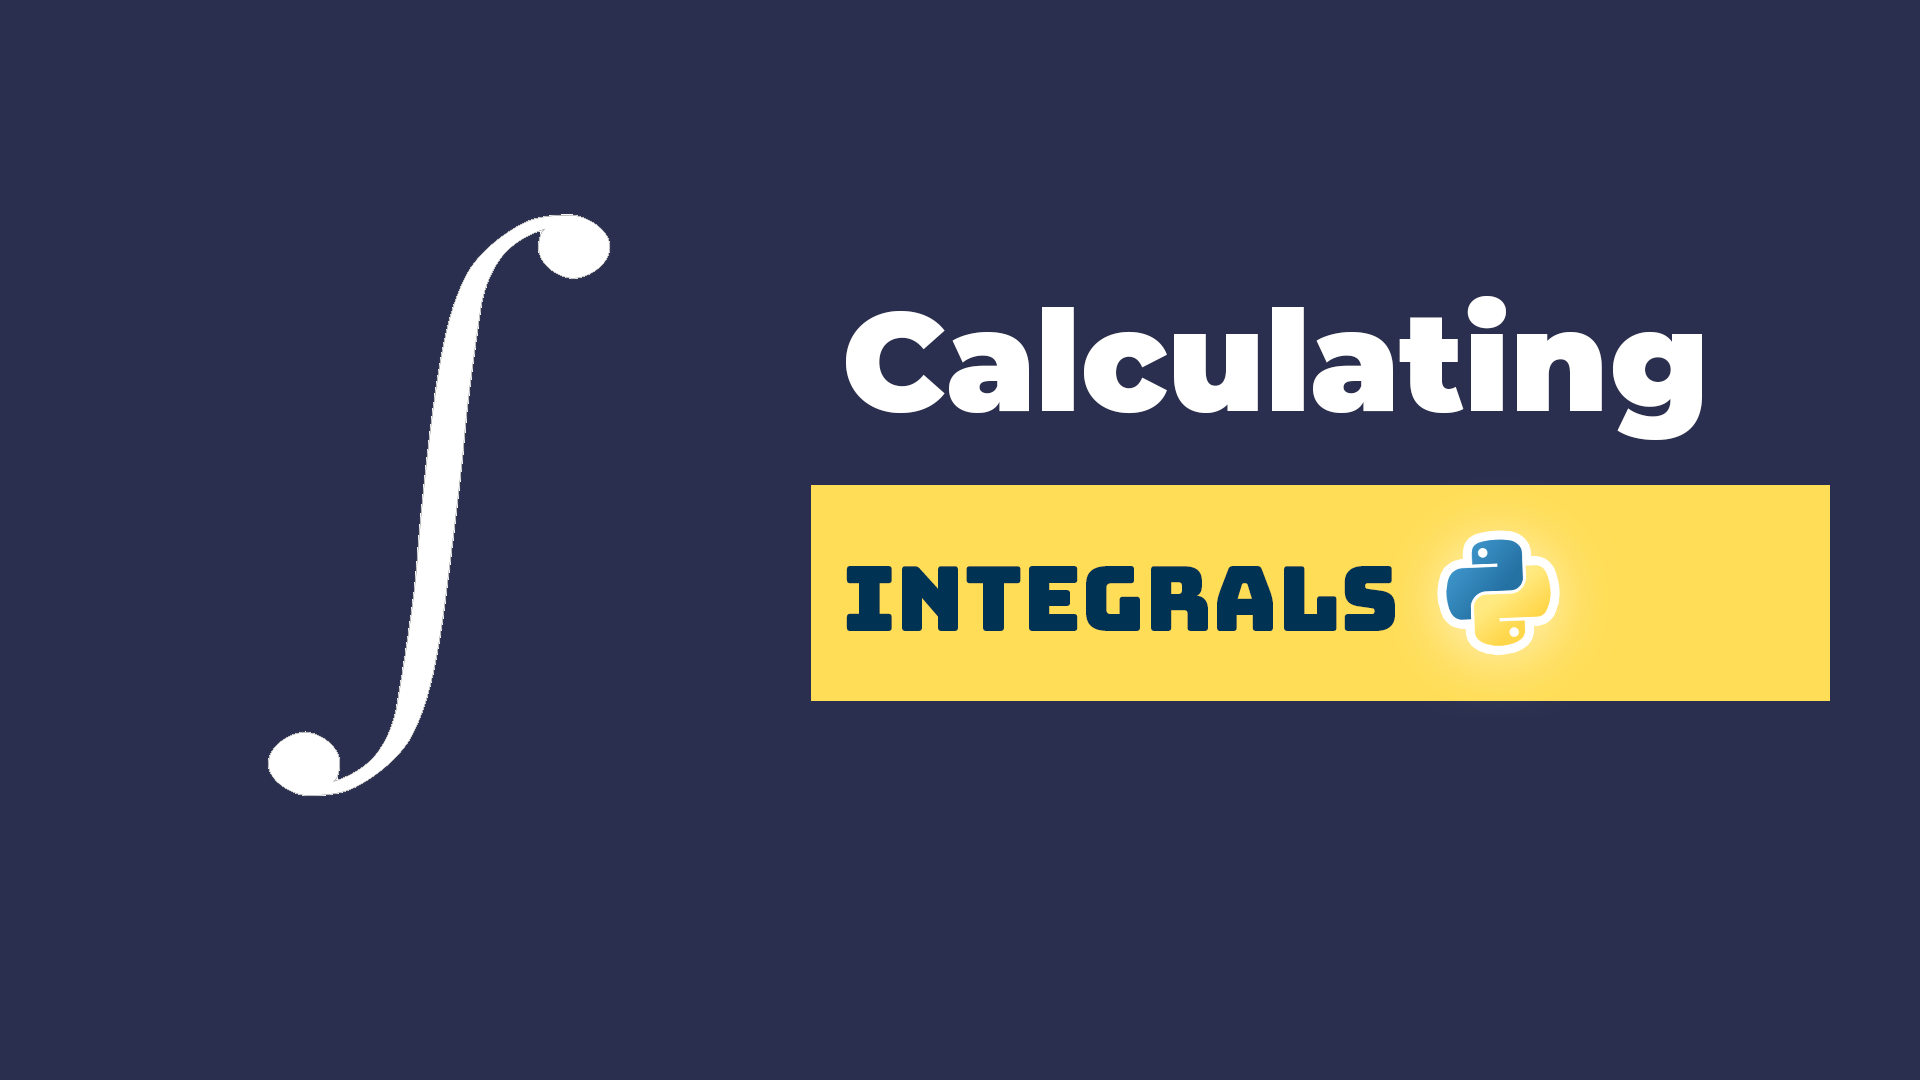 How to Calculate Definite and Indefinite Integrals in Python